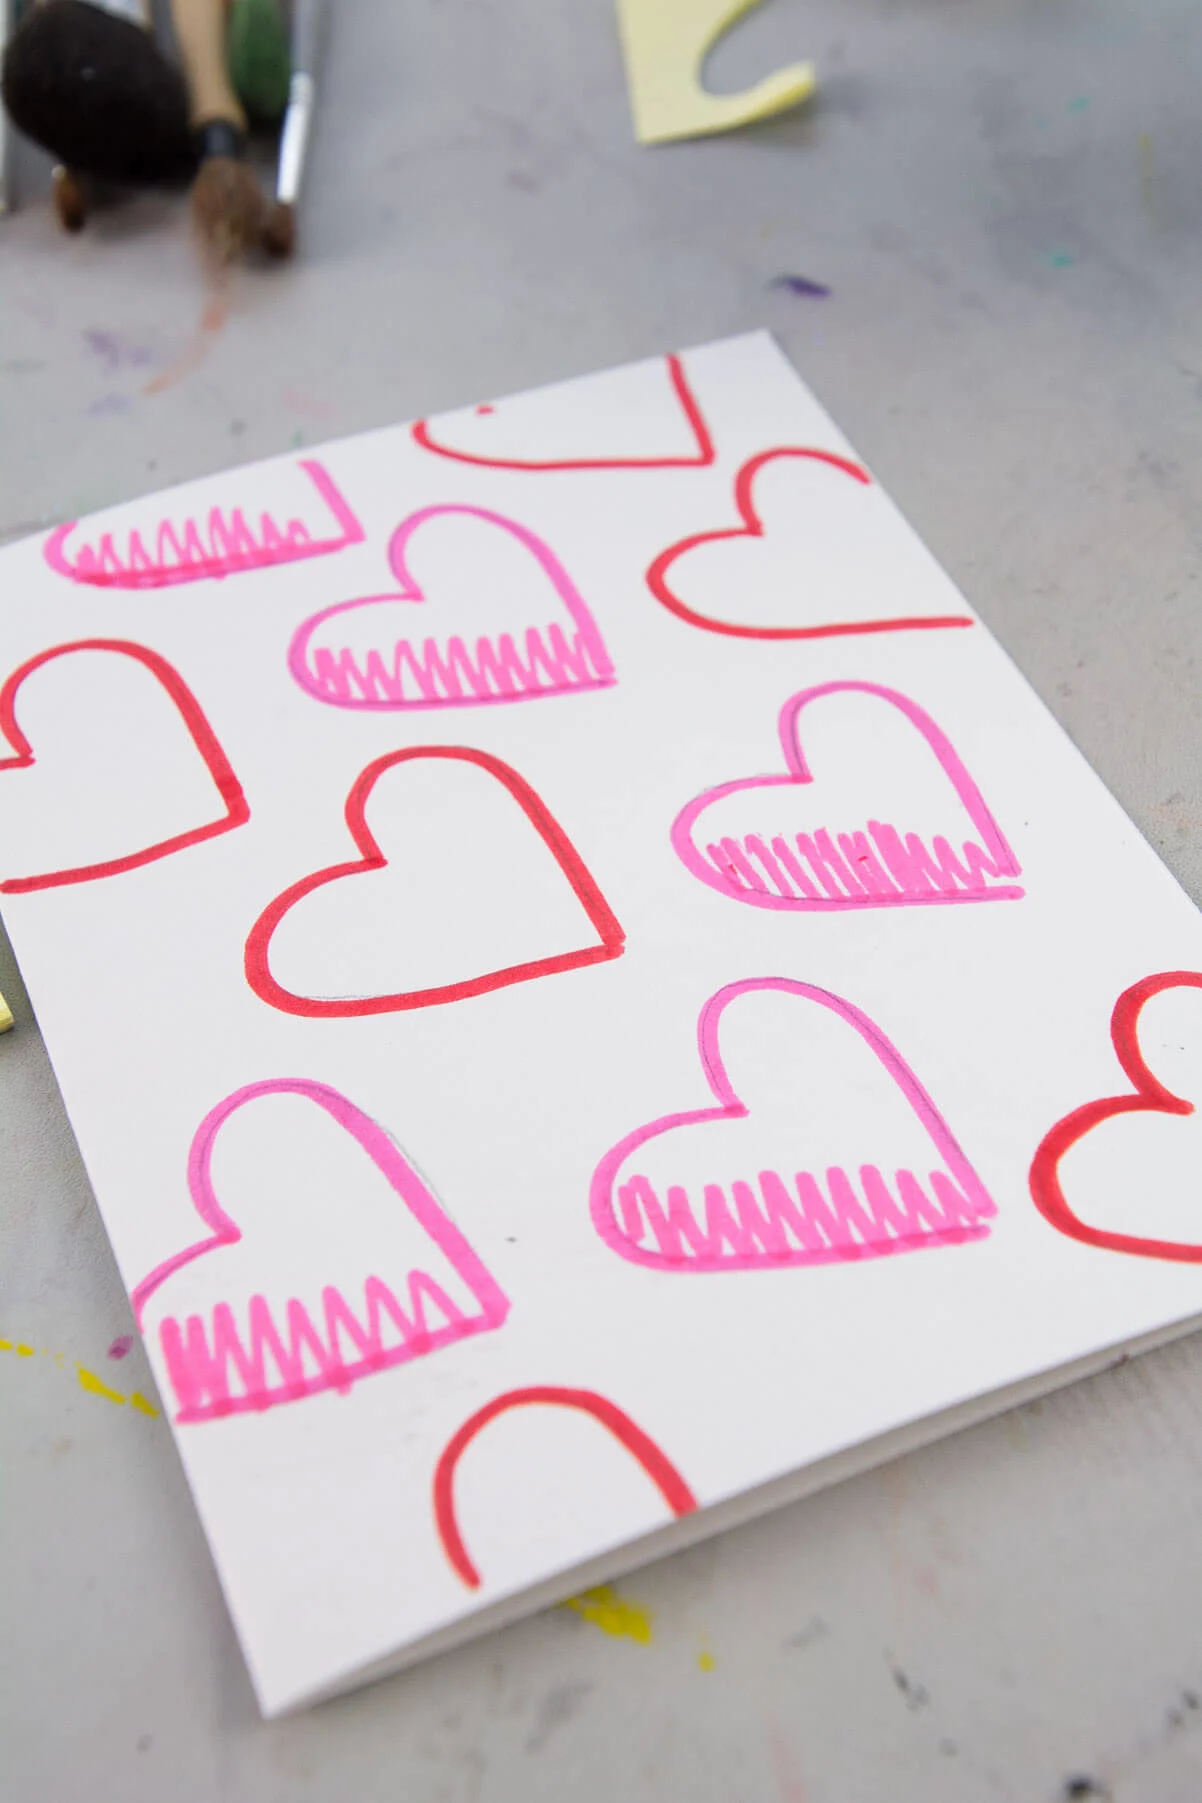 red and pink hearts drawn with marker on white paper.